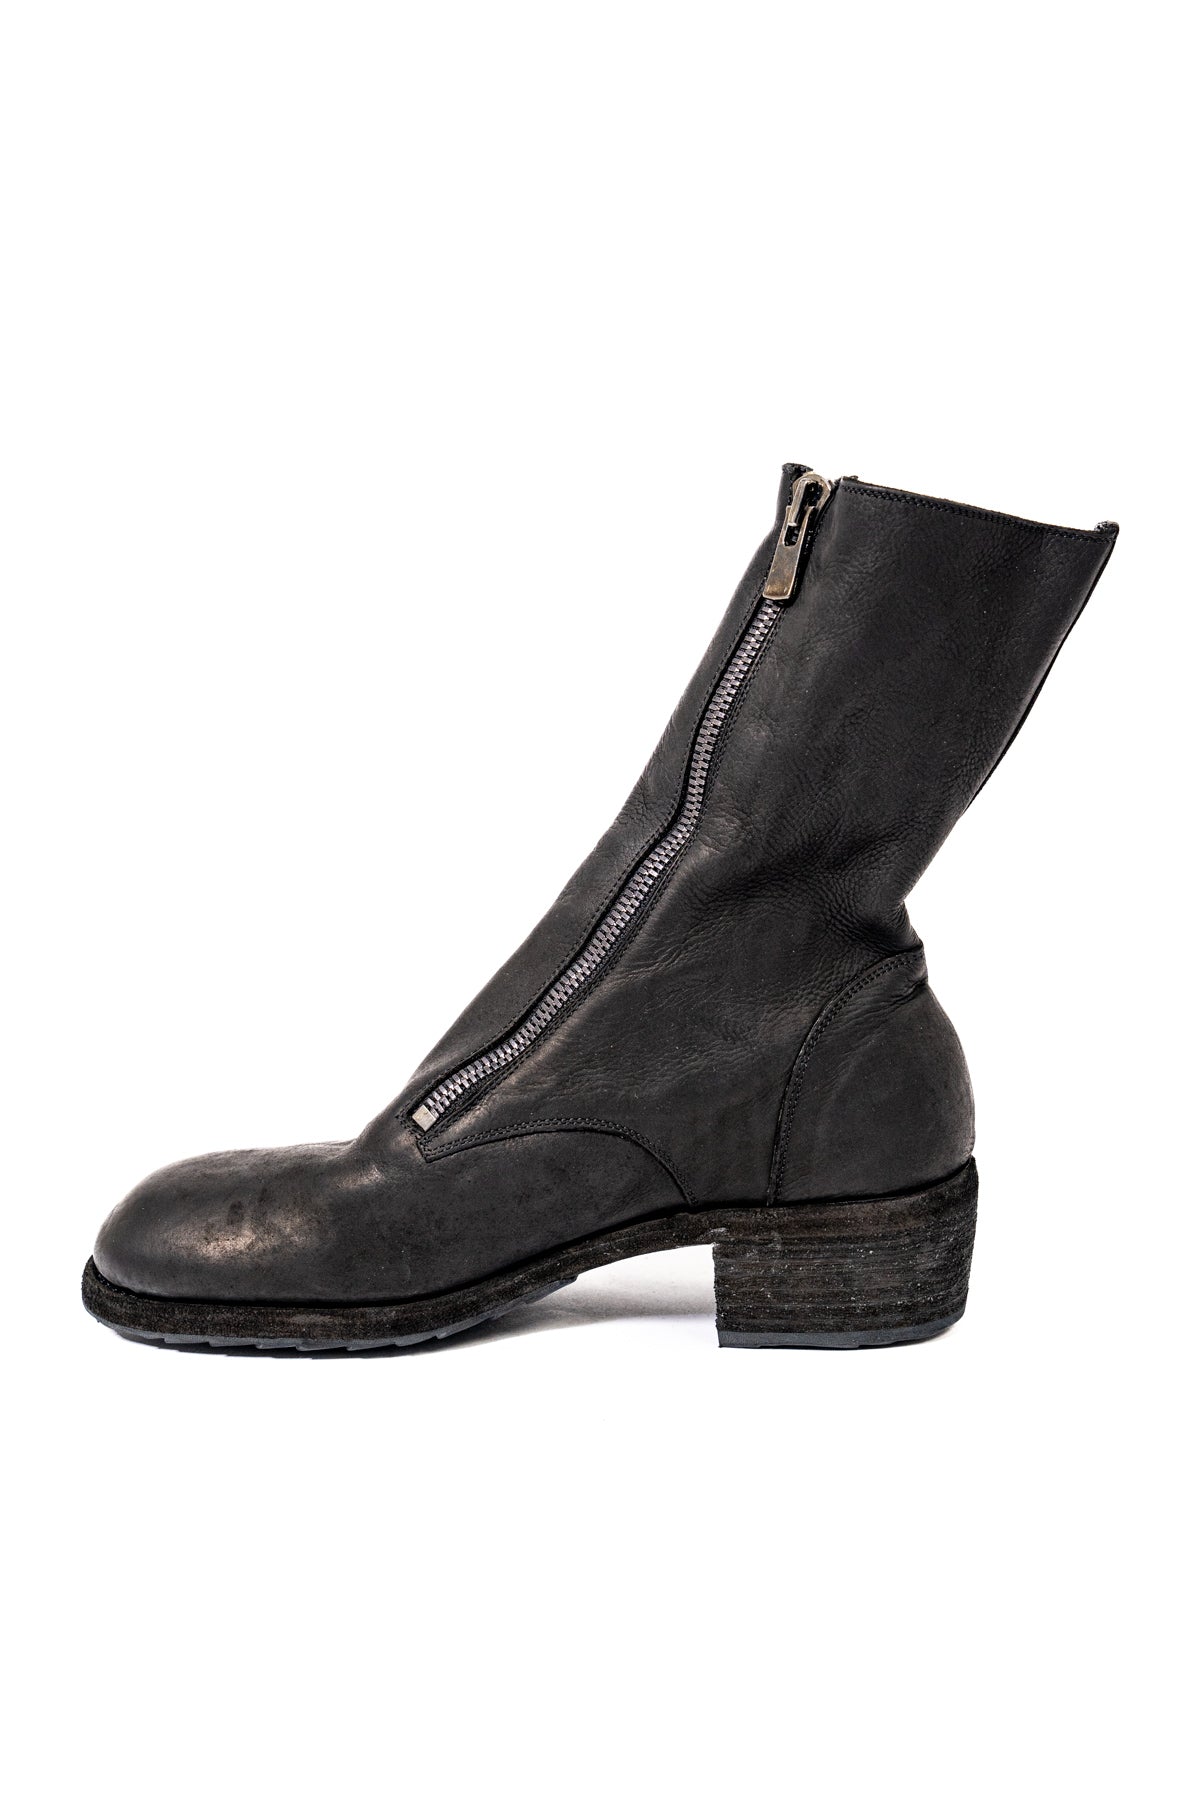 【GUIDI】SOFT CALF LEATHER FRONT ZIPPER BOOTS